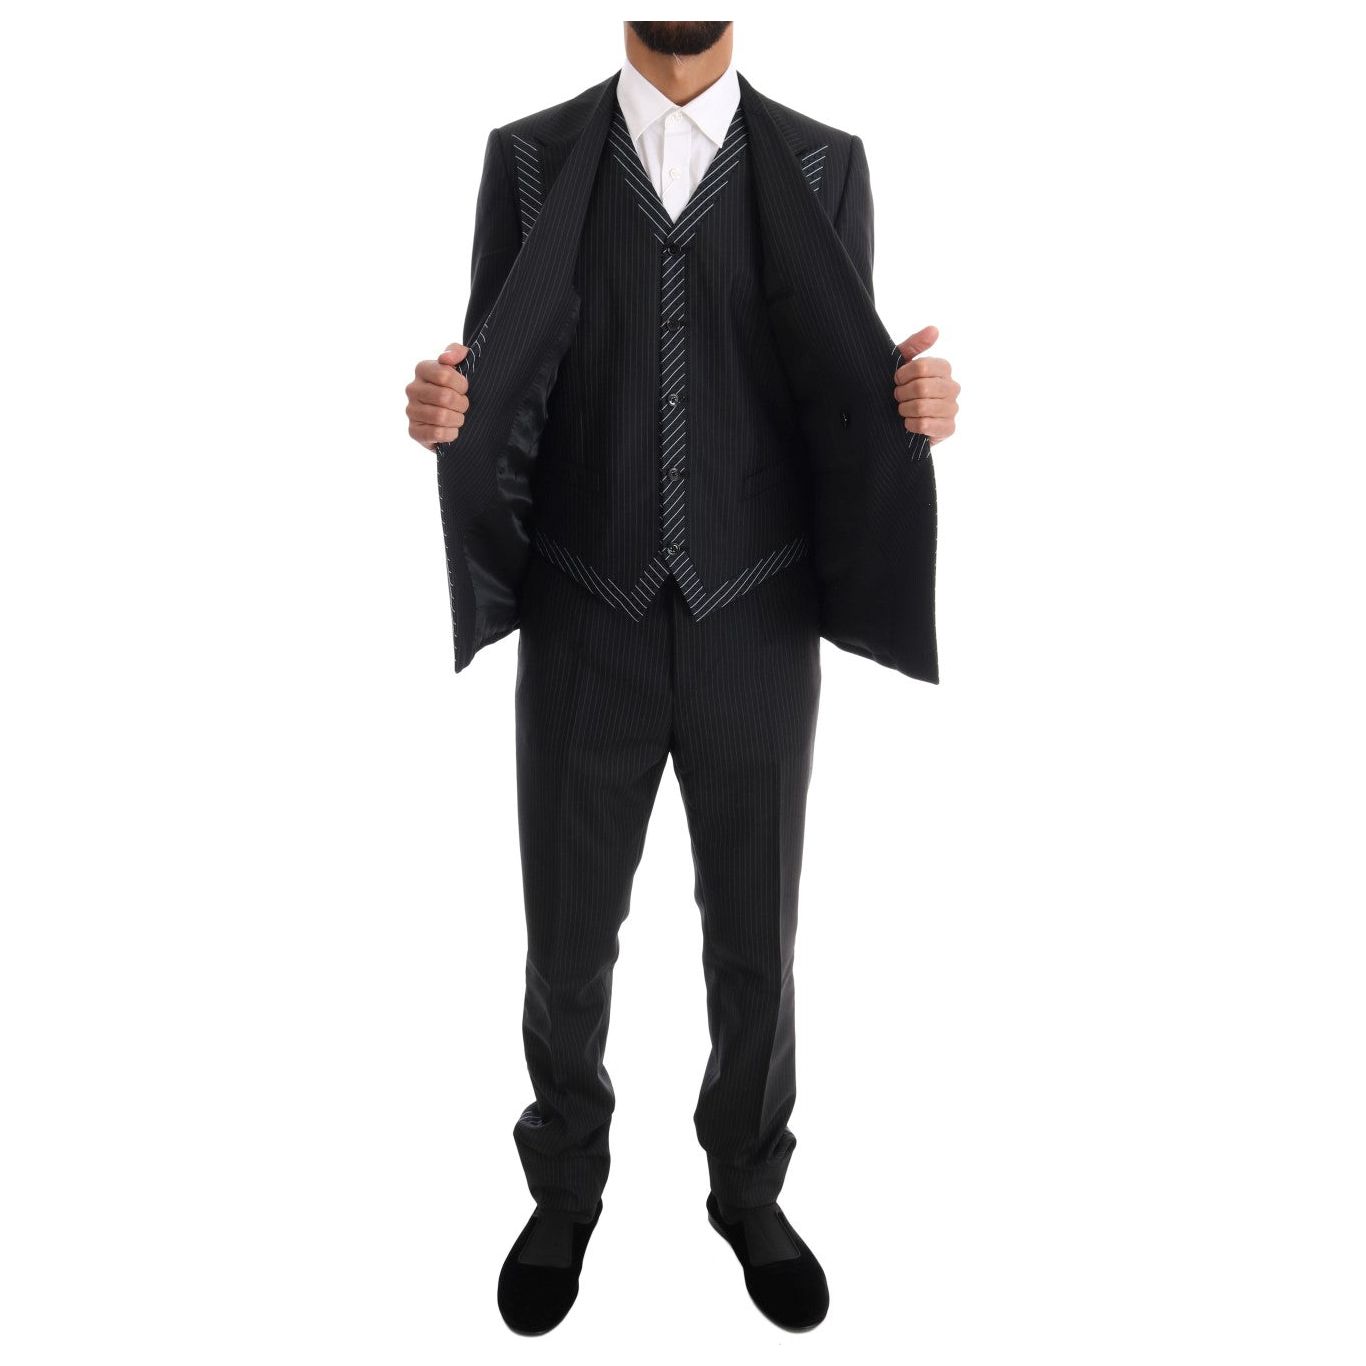 Dolce & Gabbana | Gray Double Breasted 3 Piece Suit | McRichard Designer Brands